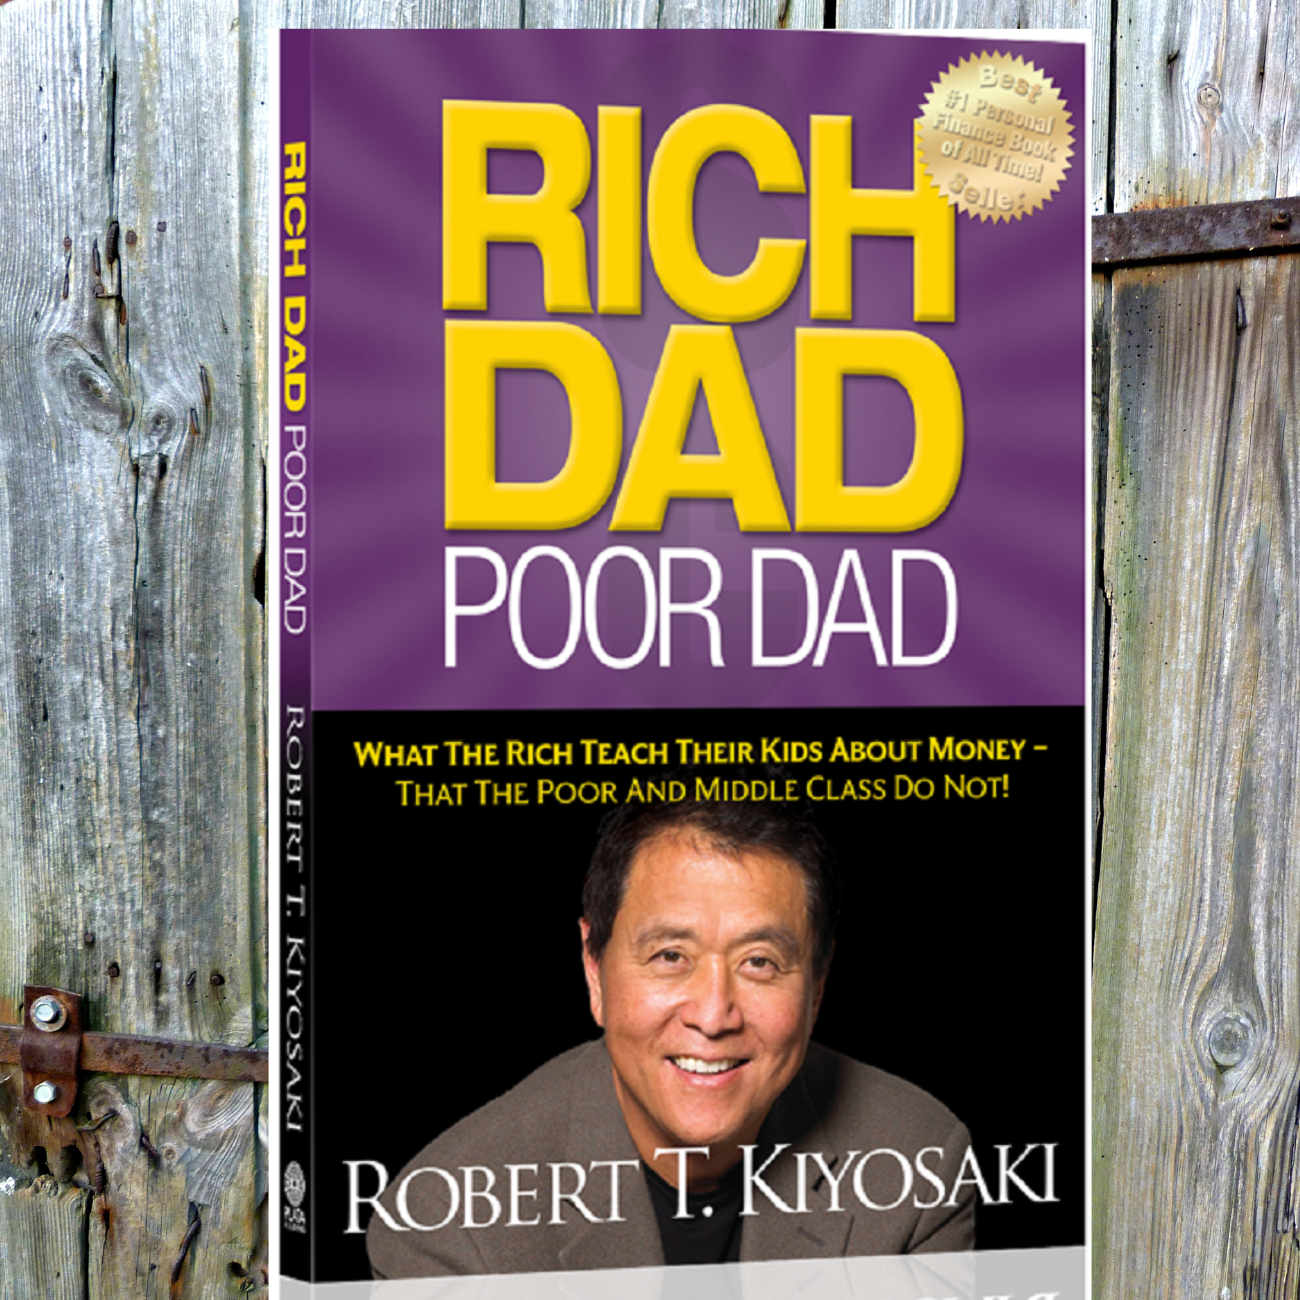 Wealth Wisdom: Unpacking the Lessons from ‘Rich Dad Poor Dad’ by Robert T. Kiyosaki!